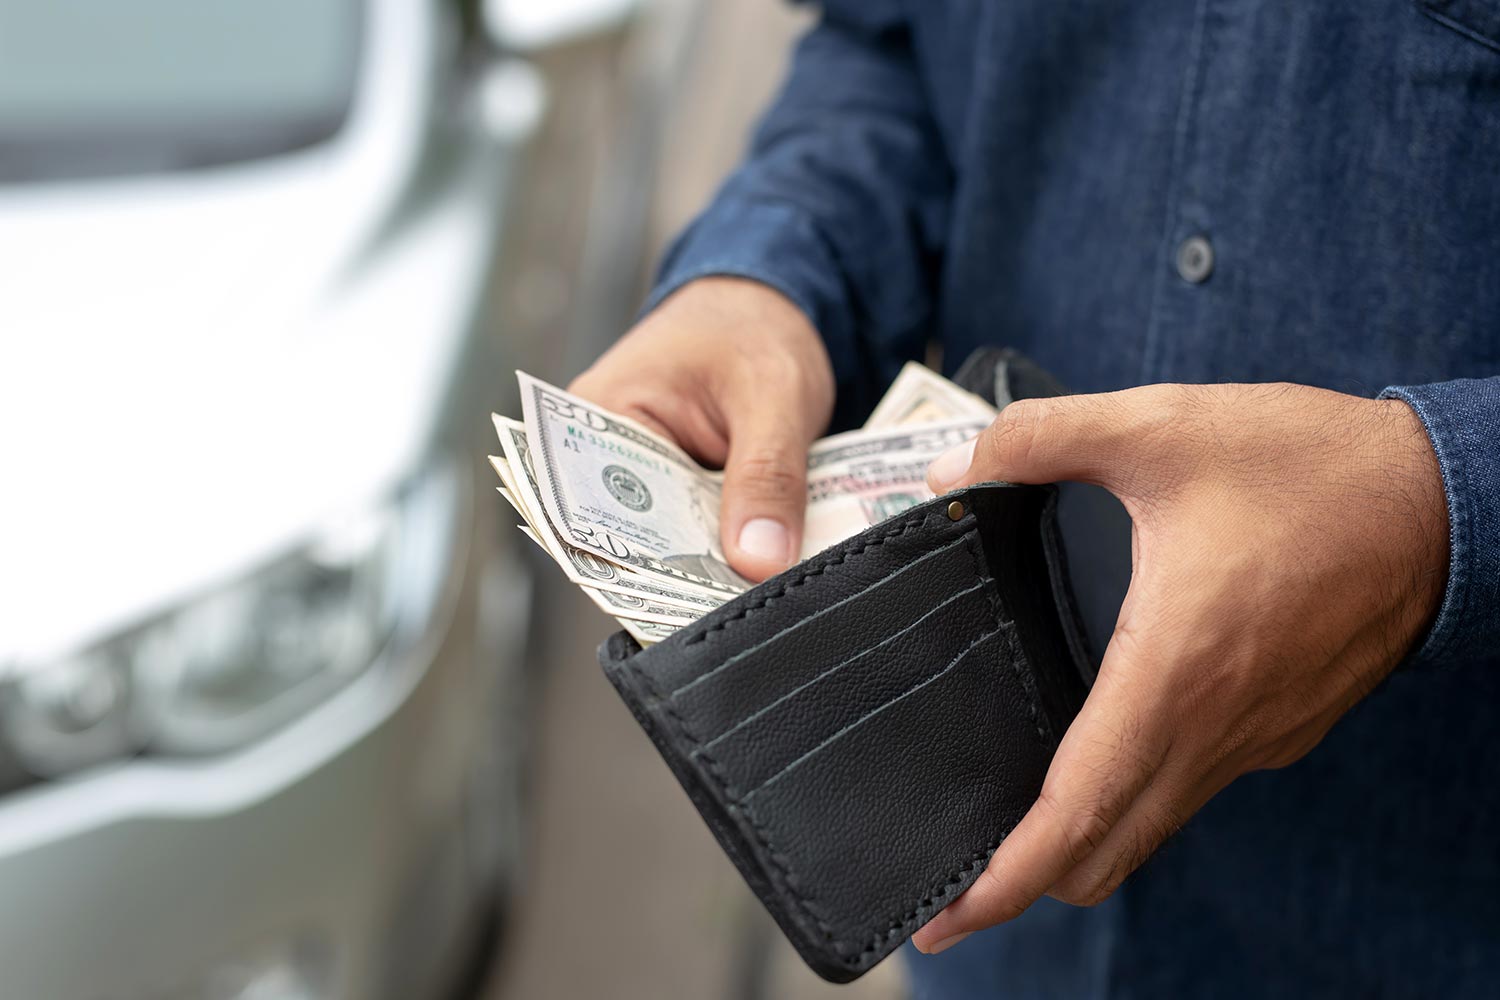 A wallet with cash being opened